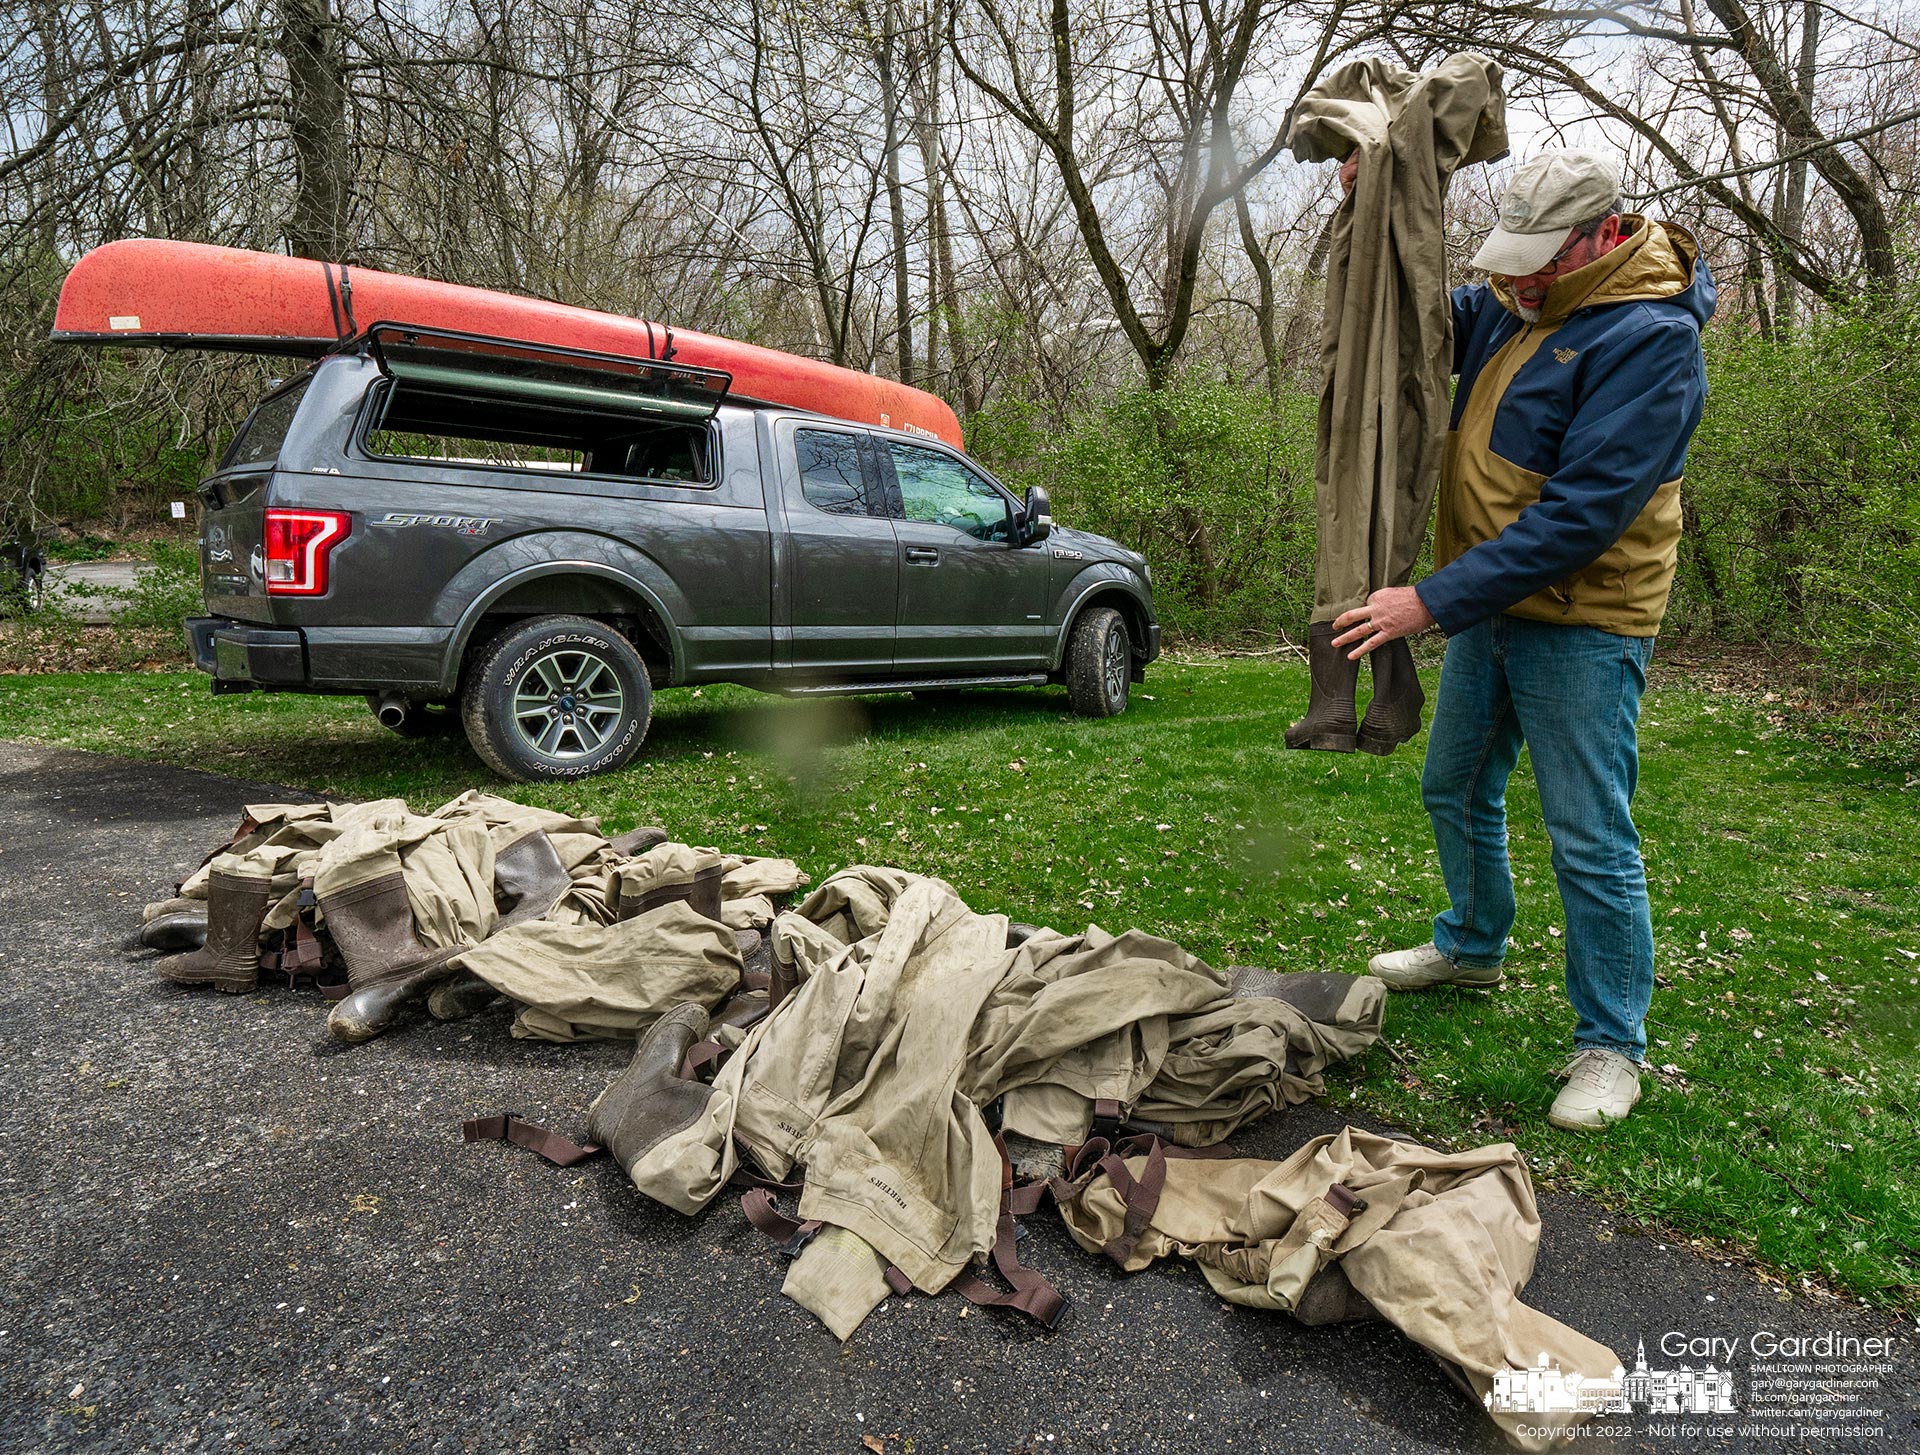 An Otterbein University professor loads unused waders into his vehicle after deciding to remove studying the ecology of Alum Creek for his next class due to the cold weather and water. My Final Photo for April 19, 2022.